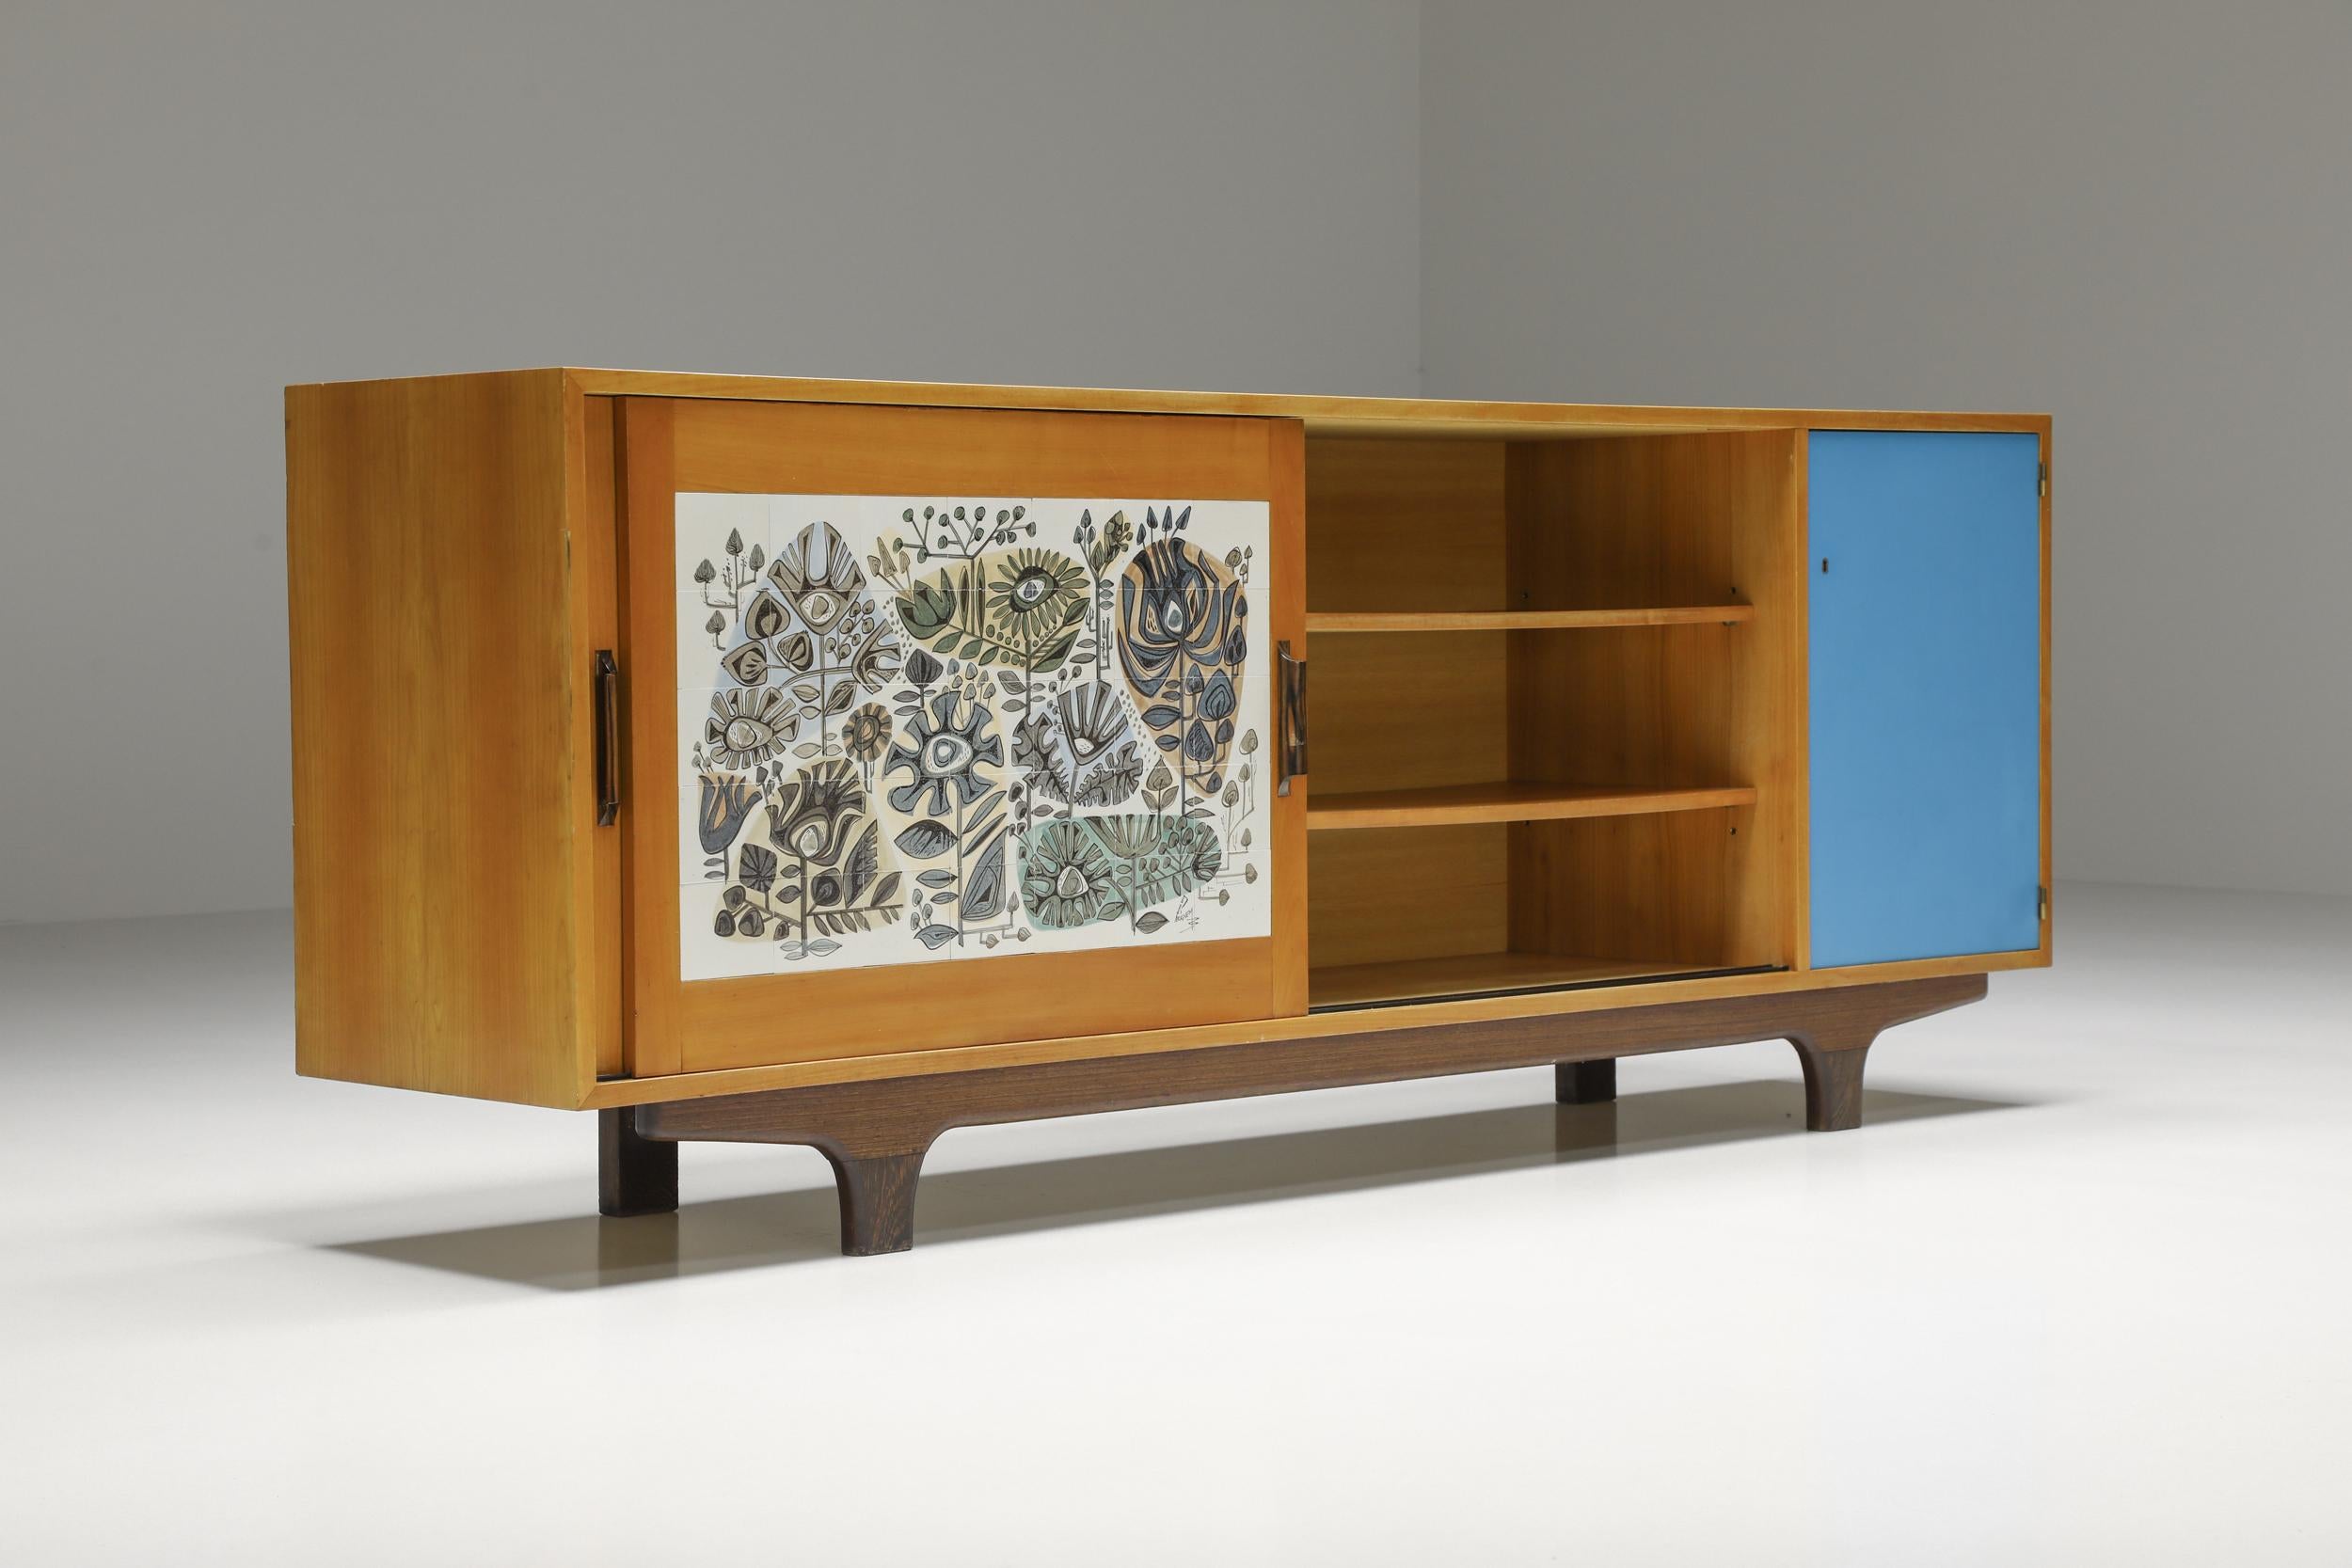 Willy Van Der Meeren; Charlotte Perriand; Alfred Hendrickx; Modernist; Sideboard; Perignem; Ceramic and Macassar; 1950s; Credenza; Belgium;

Midcentury modernist credenza with sliding doors from the 1950s, Belgium. The sideboard shows some very